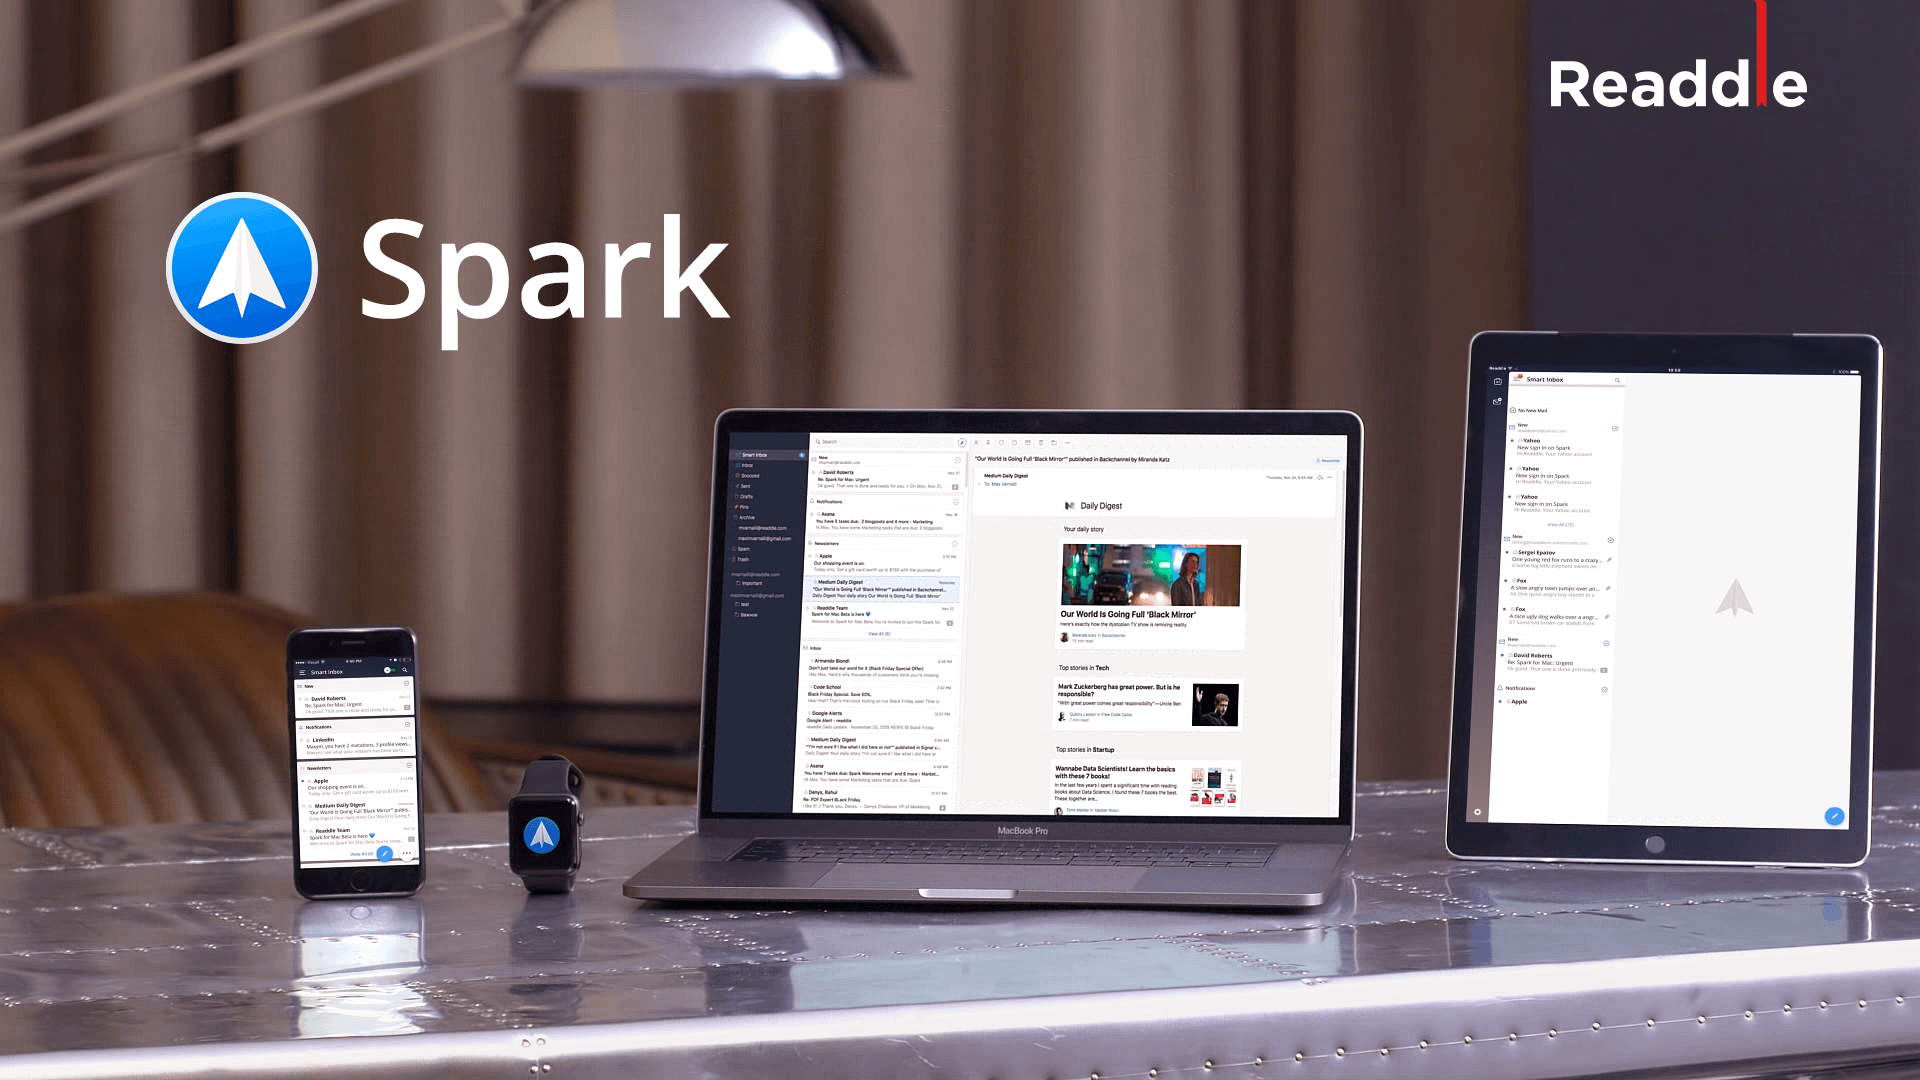 Spark is now available on Mac.